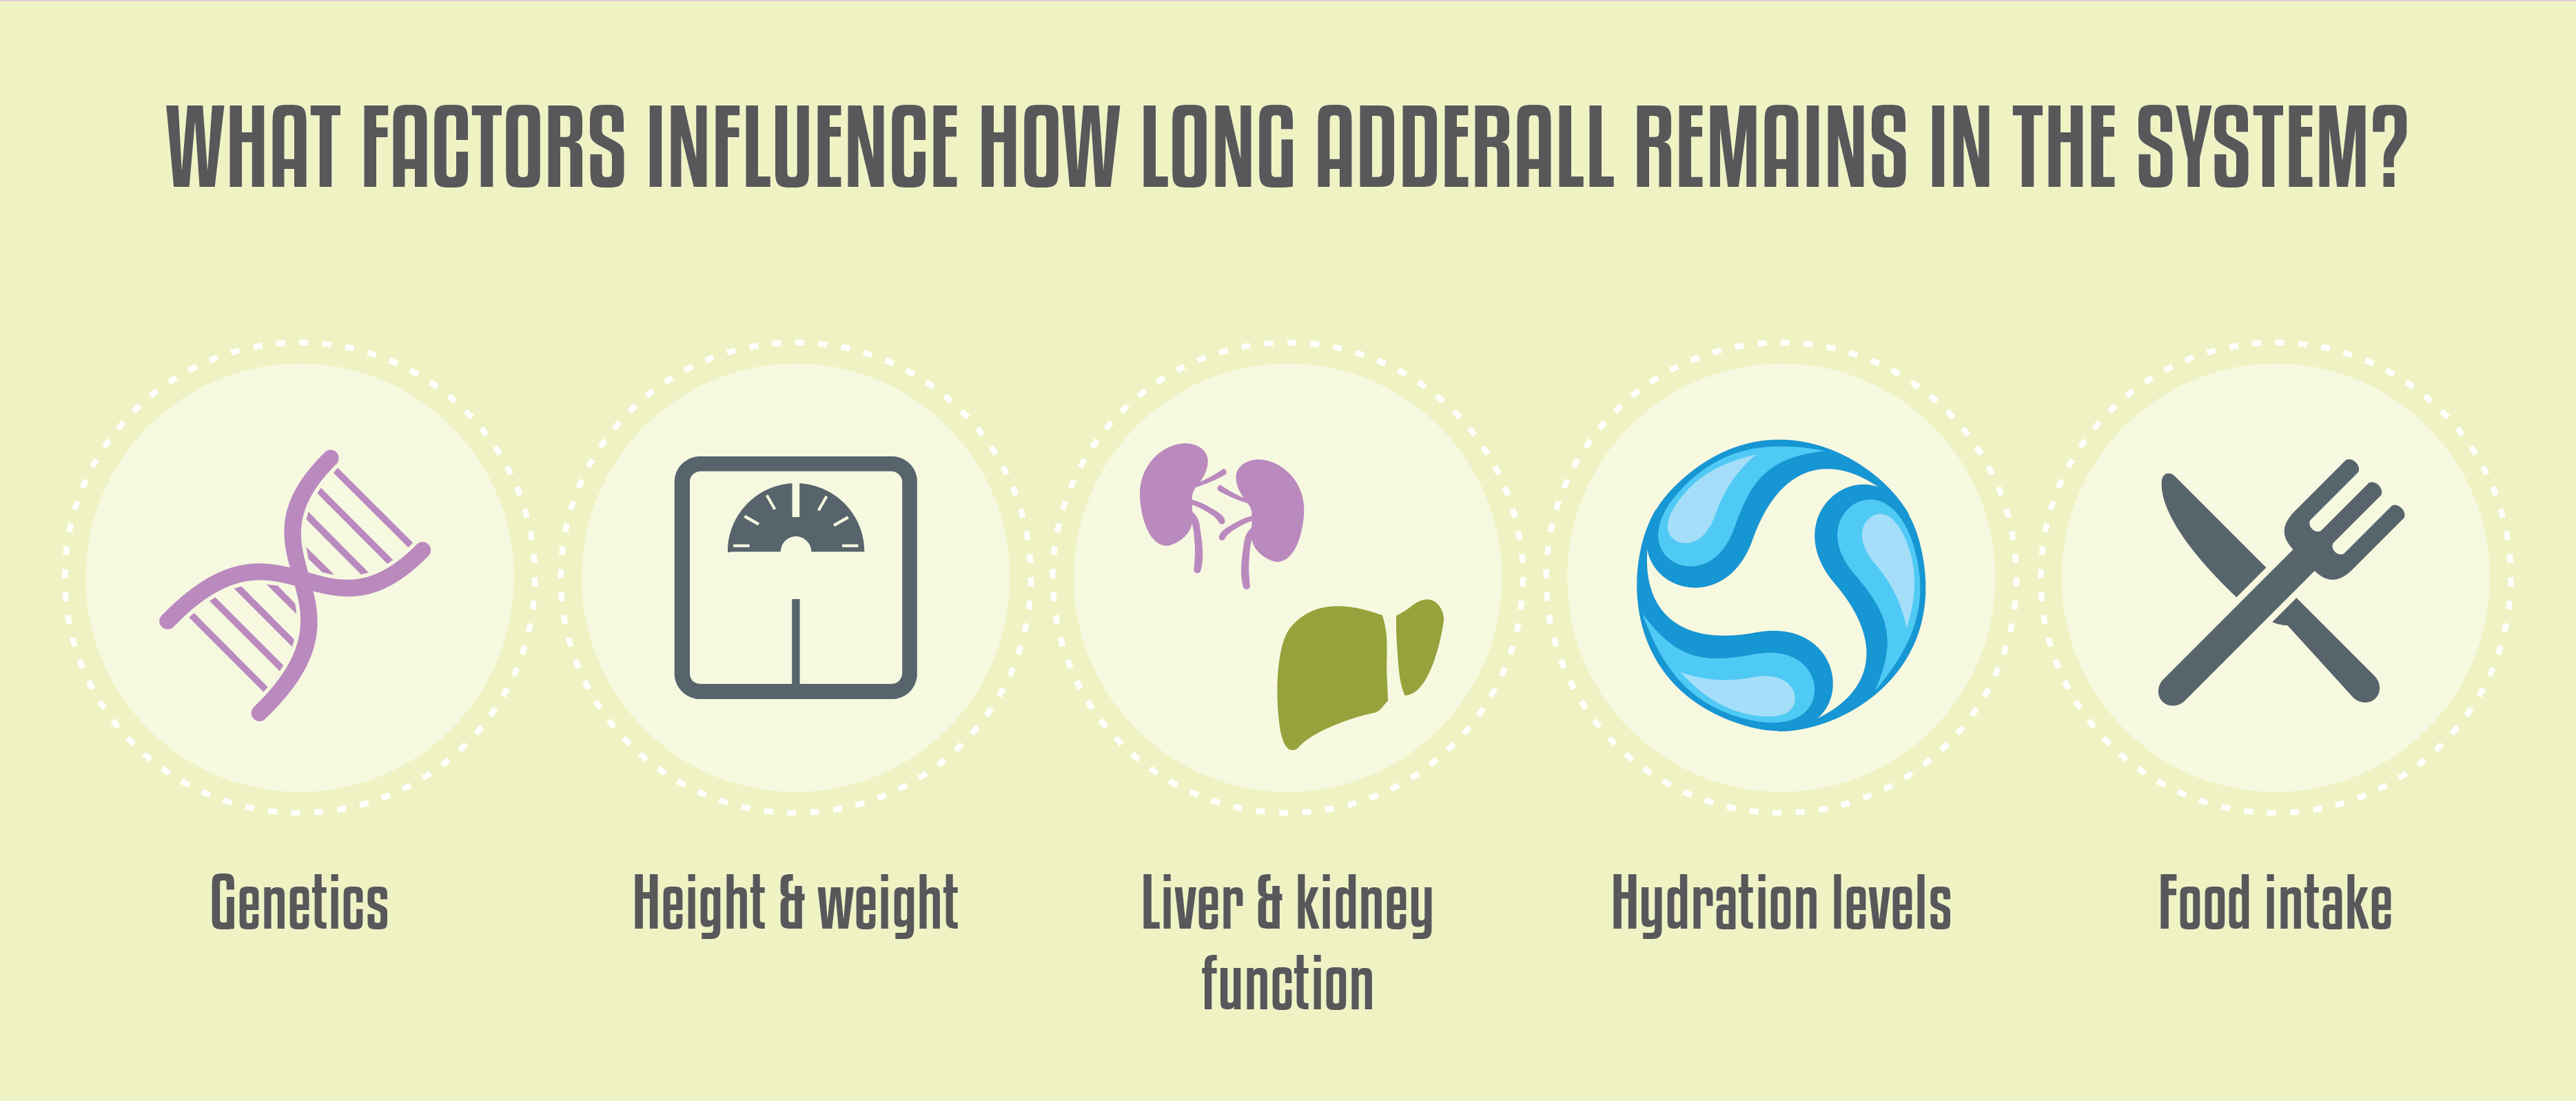 What Factors Influence How Long Adderall Remains in the System?